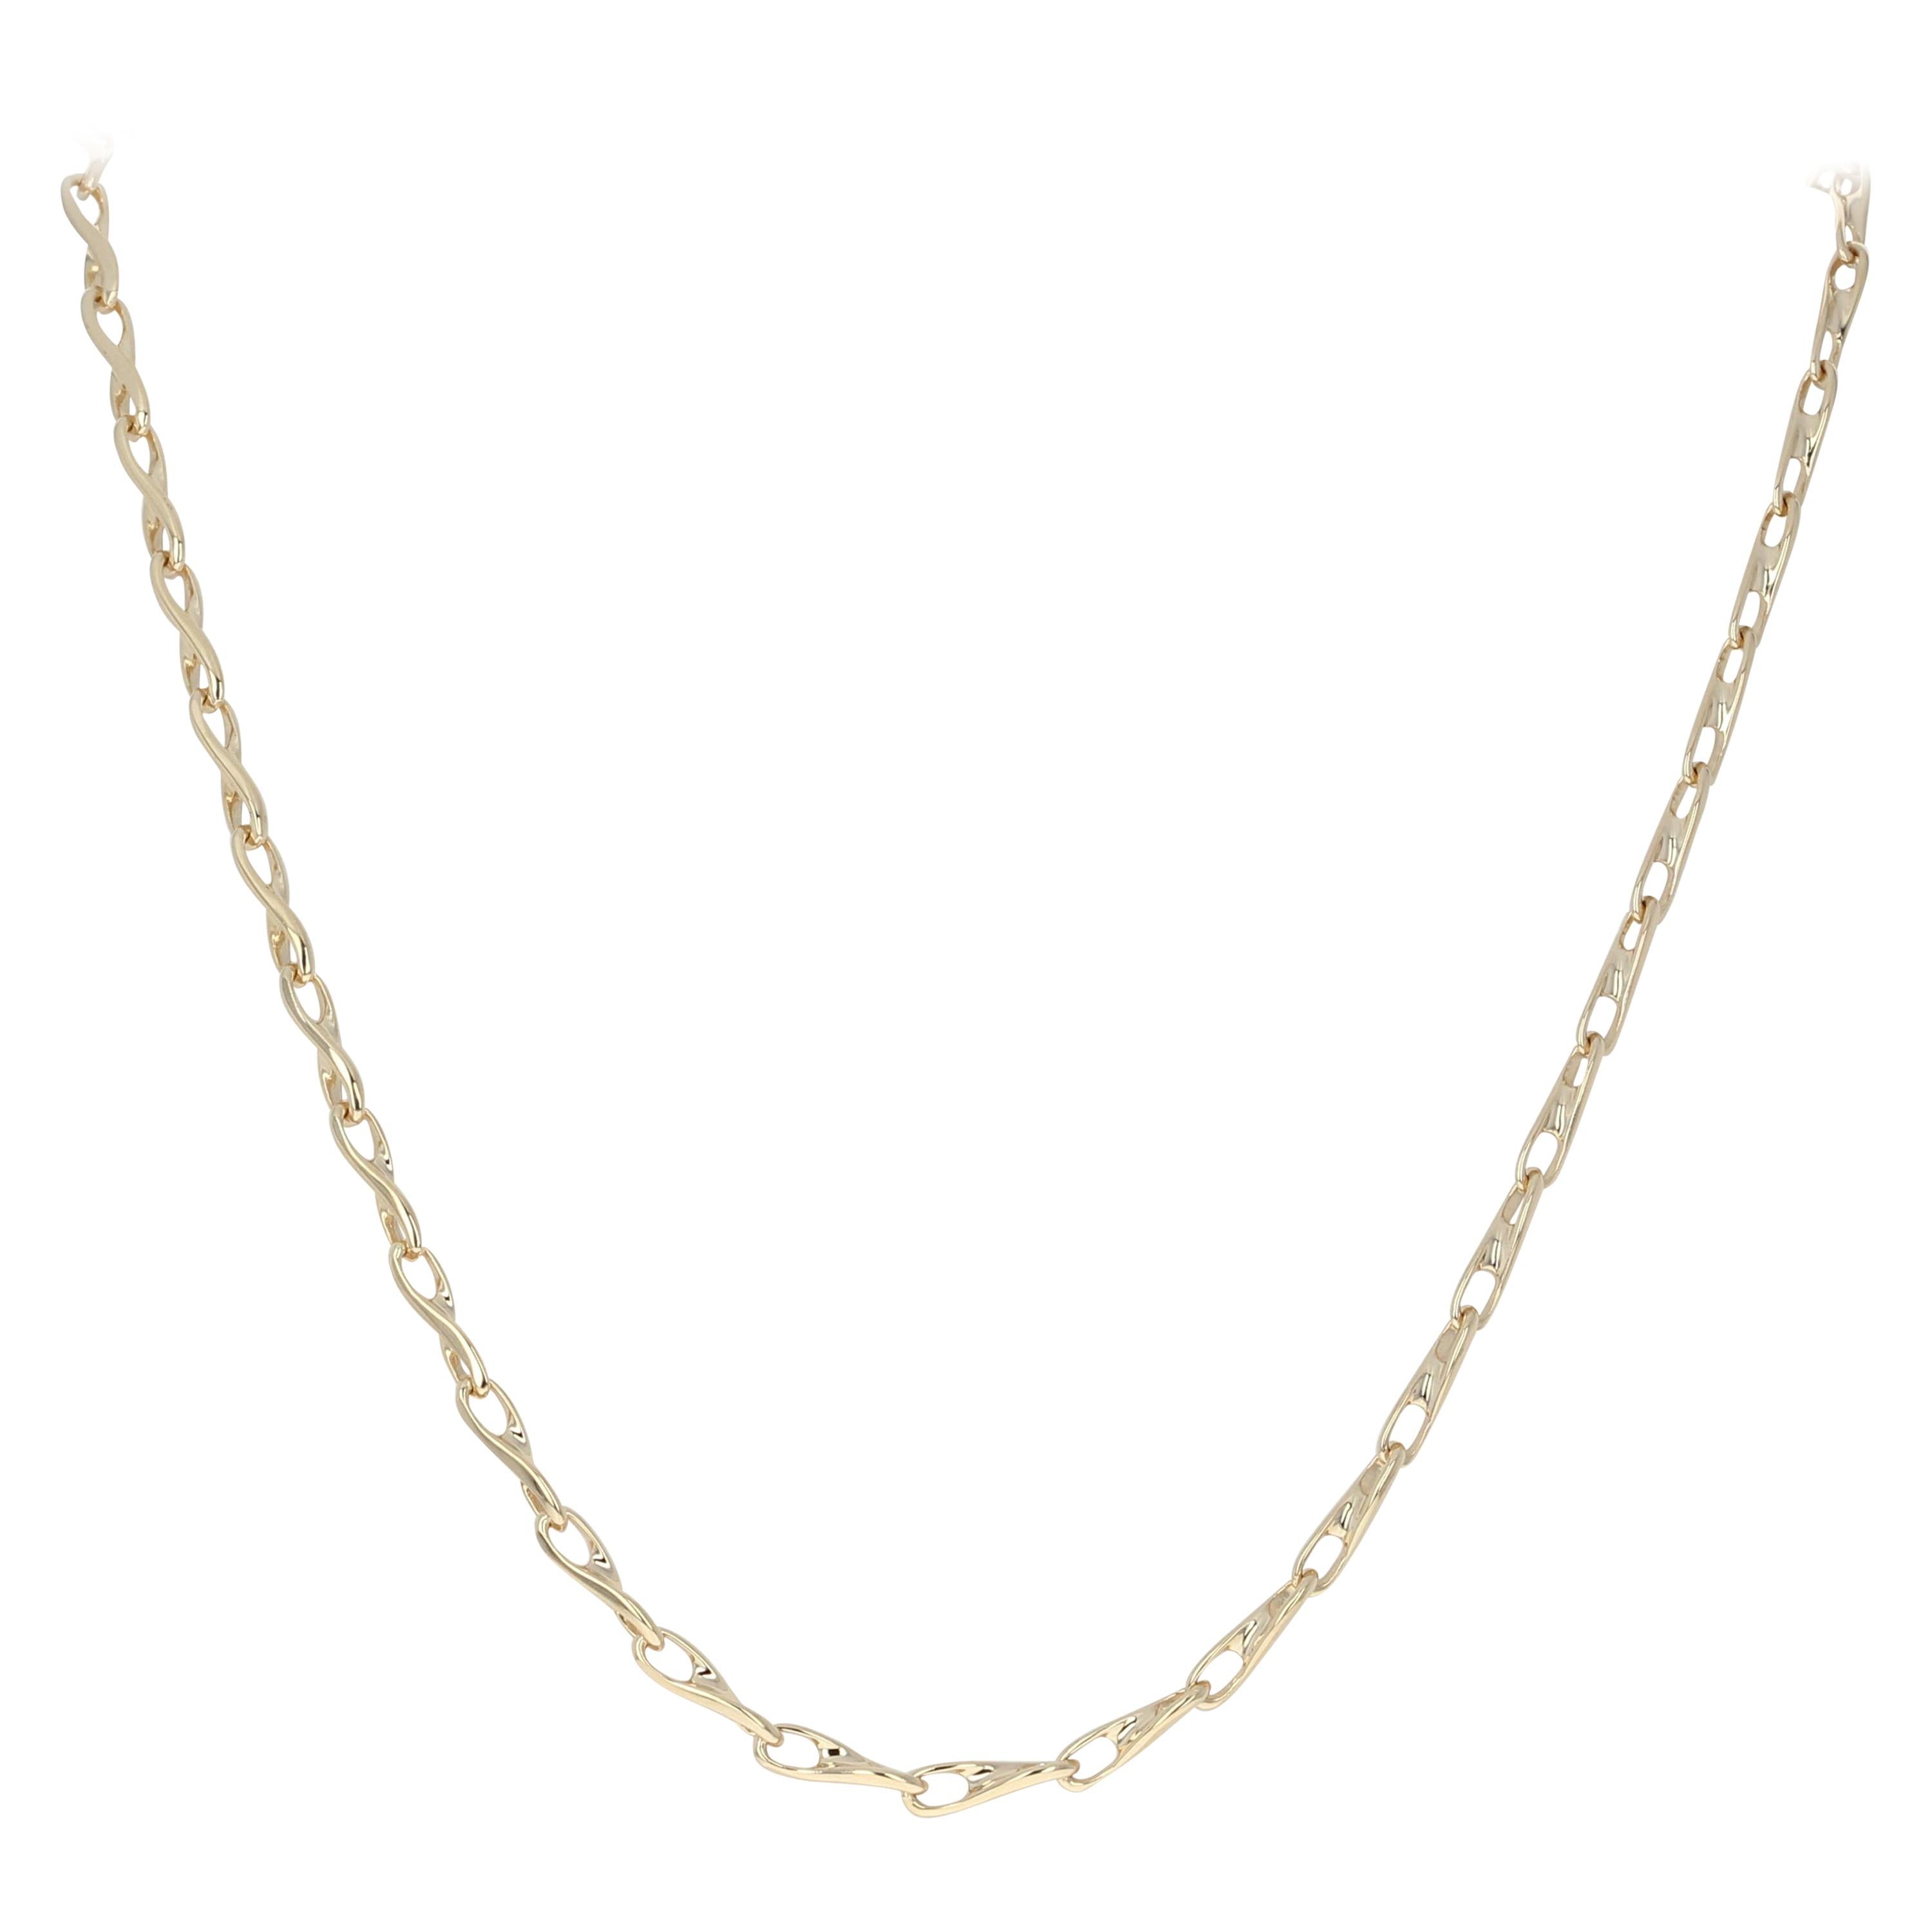 Infinity Chain Necklace, 14 Karat Yellow Gold Lobster Claw Clasp